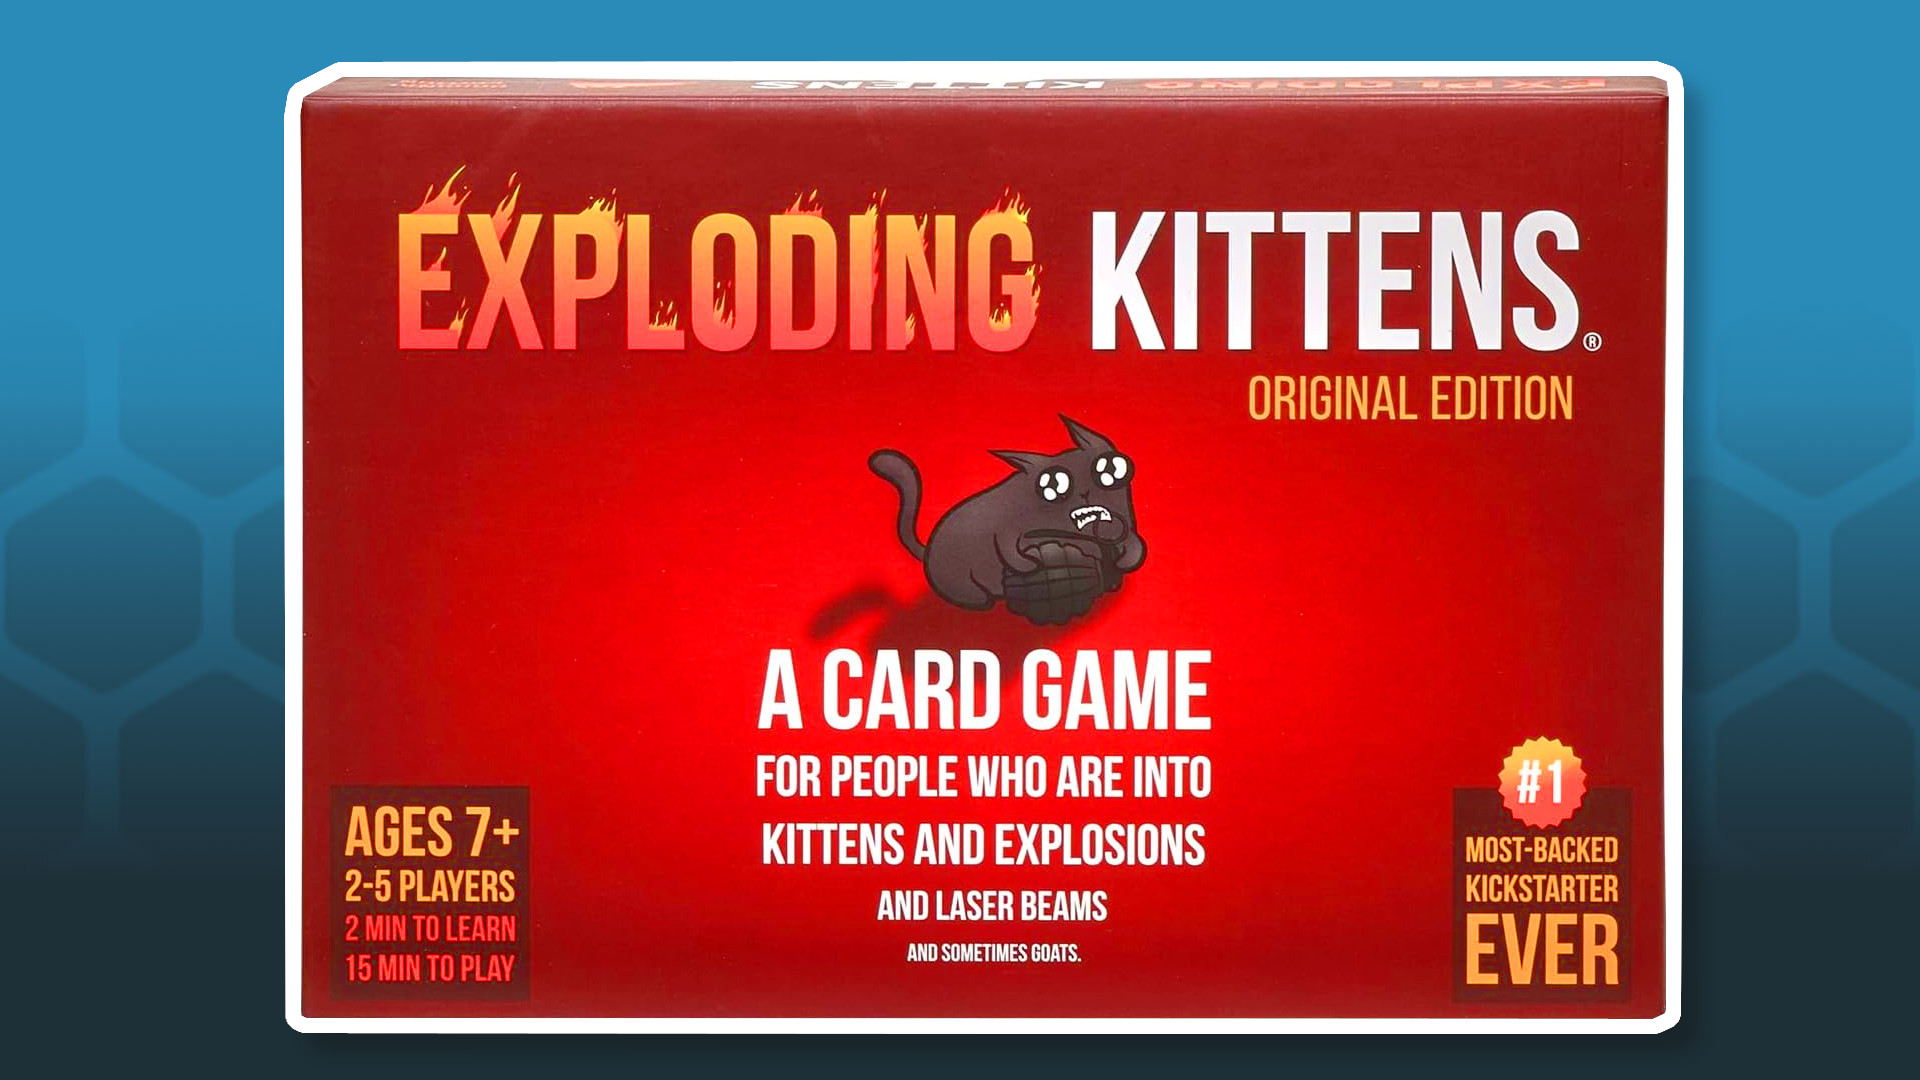 How to play Exploding Kittens – rules and tips for beginners